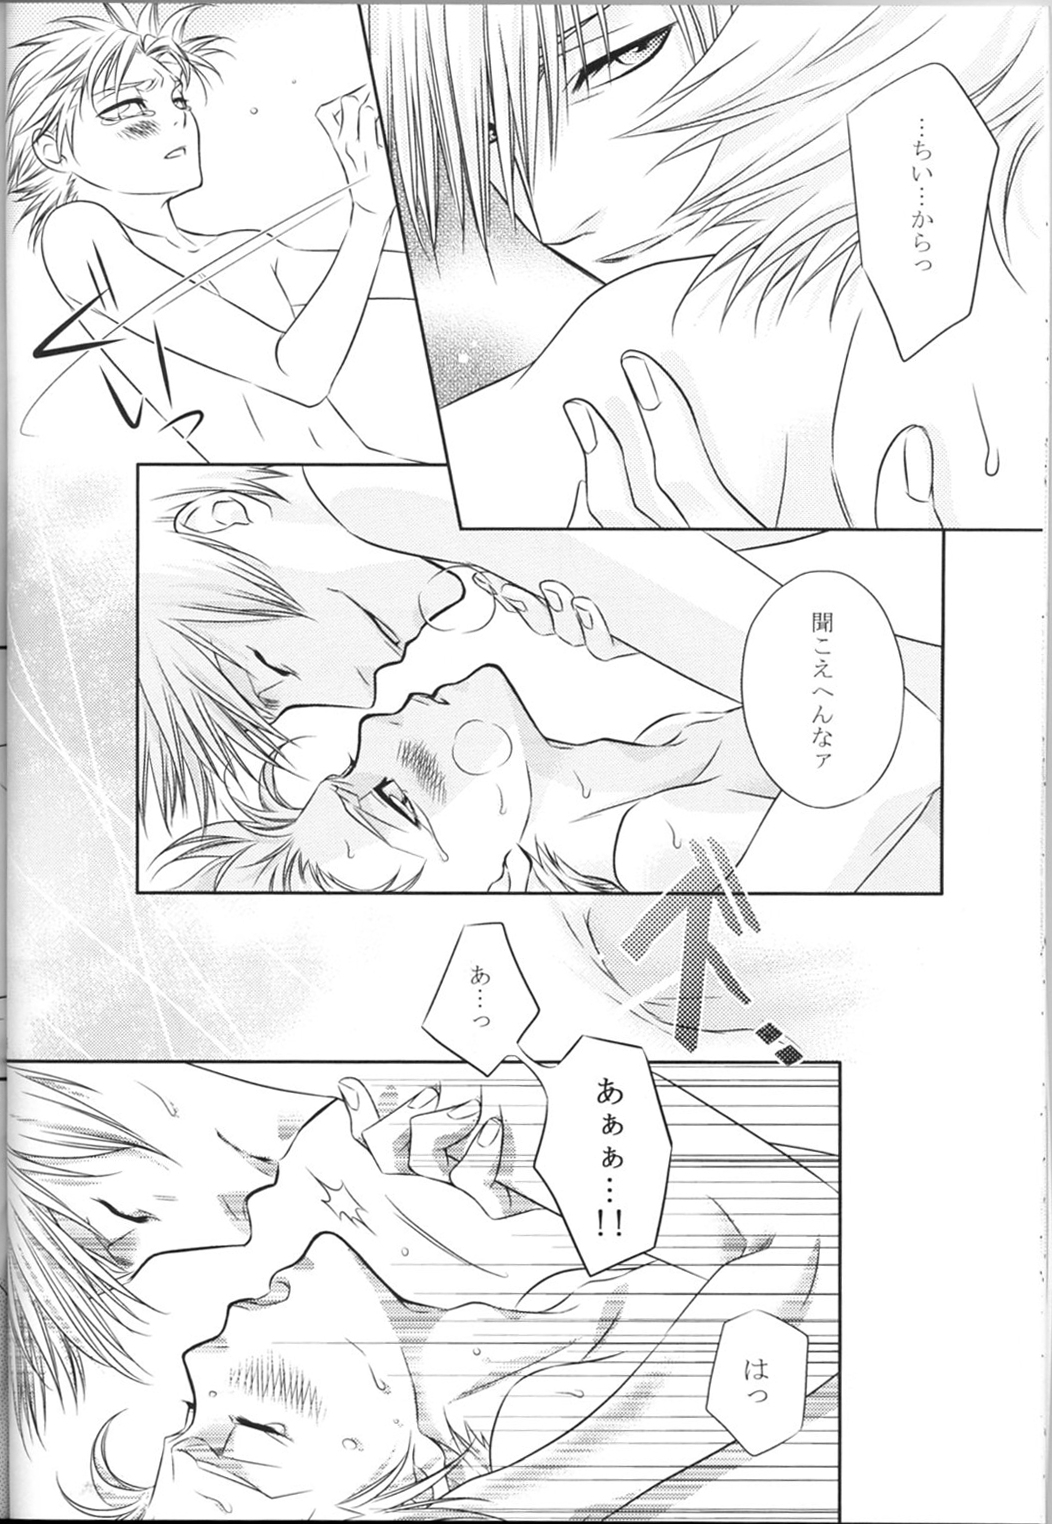 LC++ (BLEACH) page 16 full